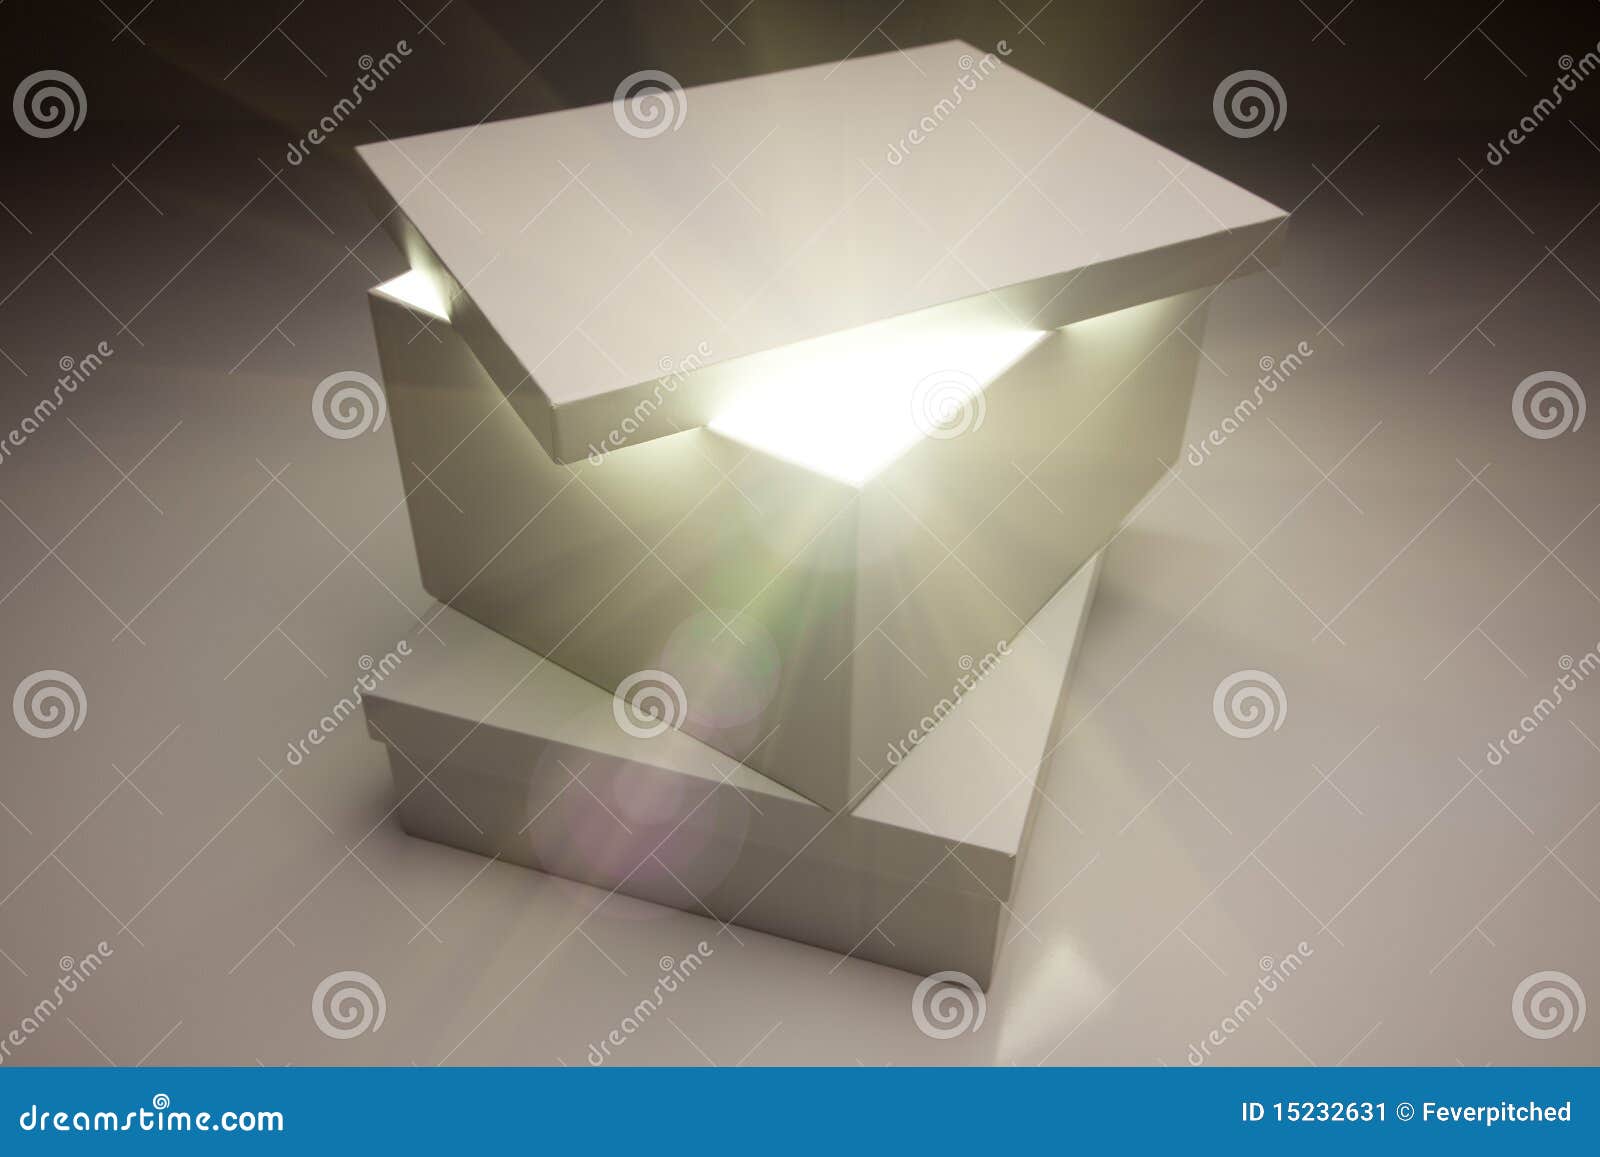 white box with lid revealing something very bright